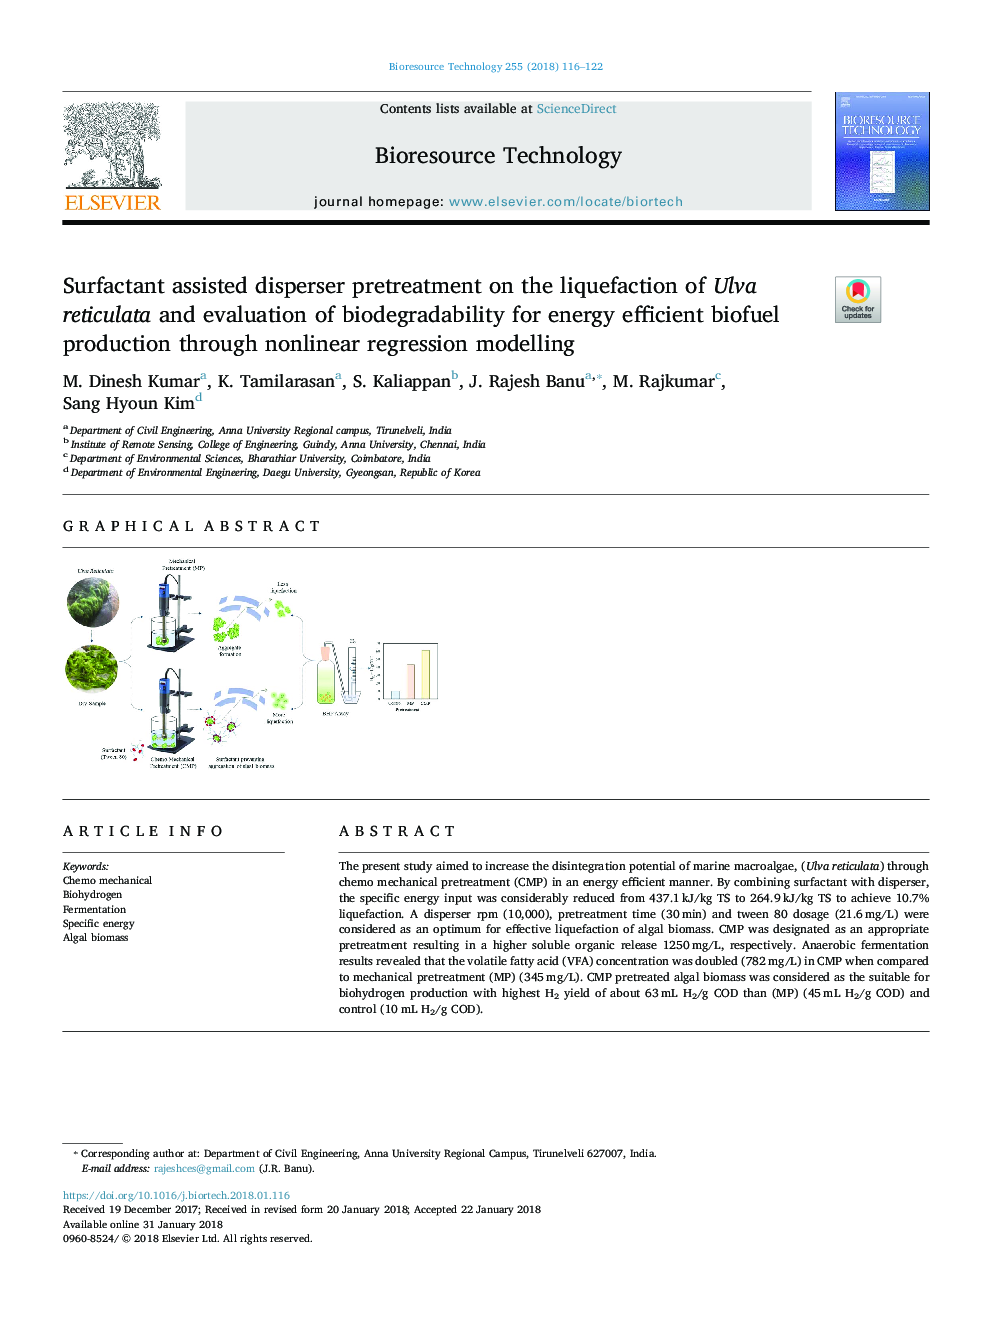 Surfactant assisted disperser pretreatment on the liquefaction of Ulva reticulata and evaluation of biodegradability for energy efficient biofuel production through nonlinear regression modelling